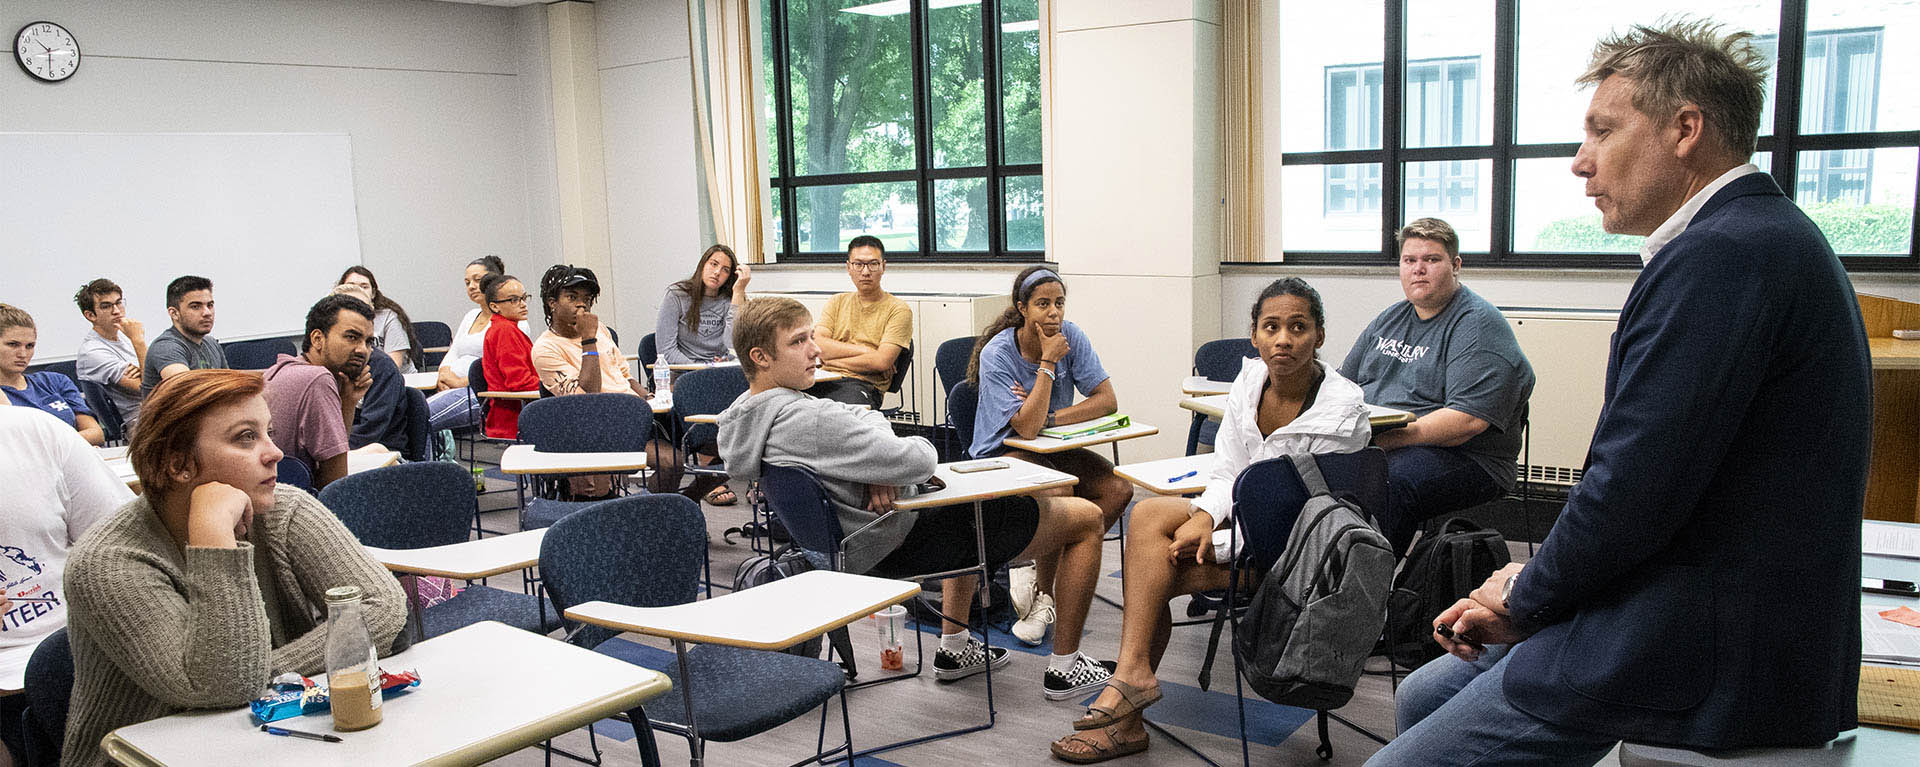 A philosophy professor talks with a group of students during a group discussion.